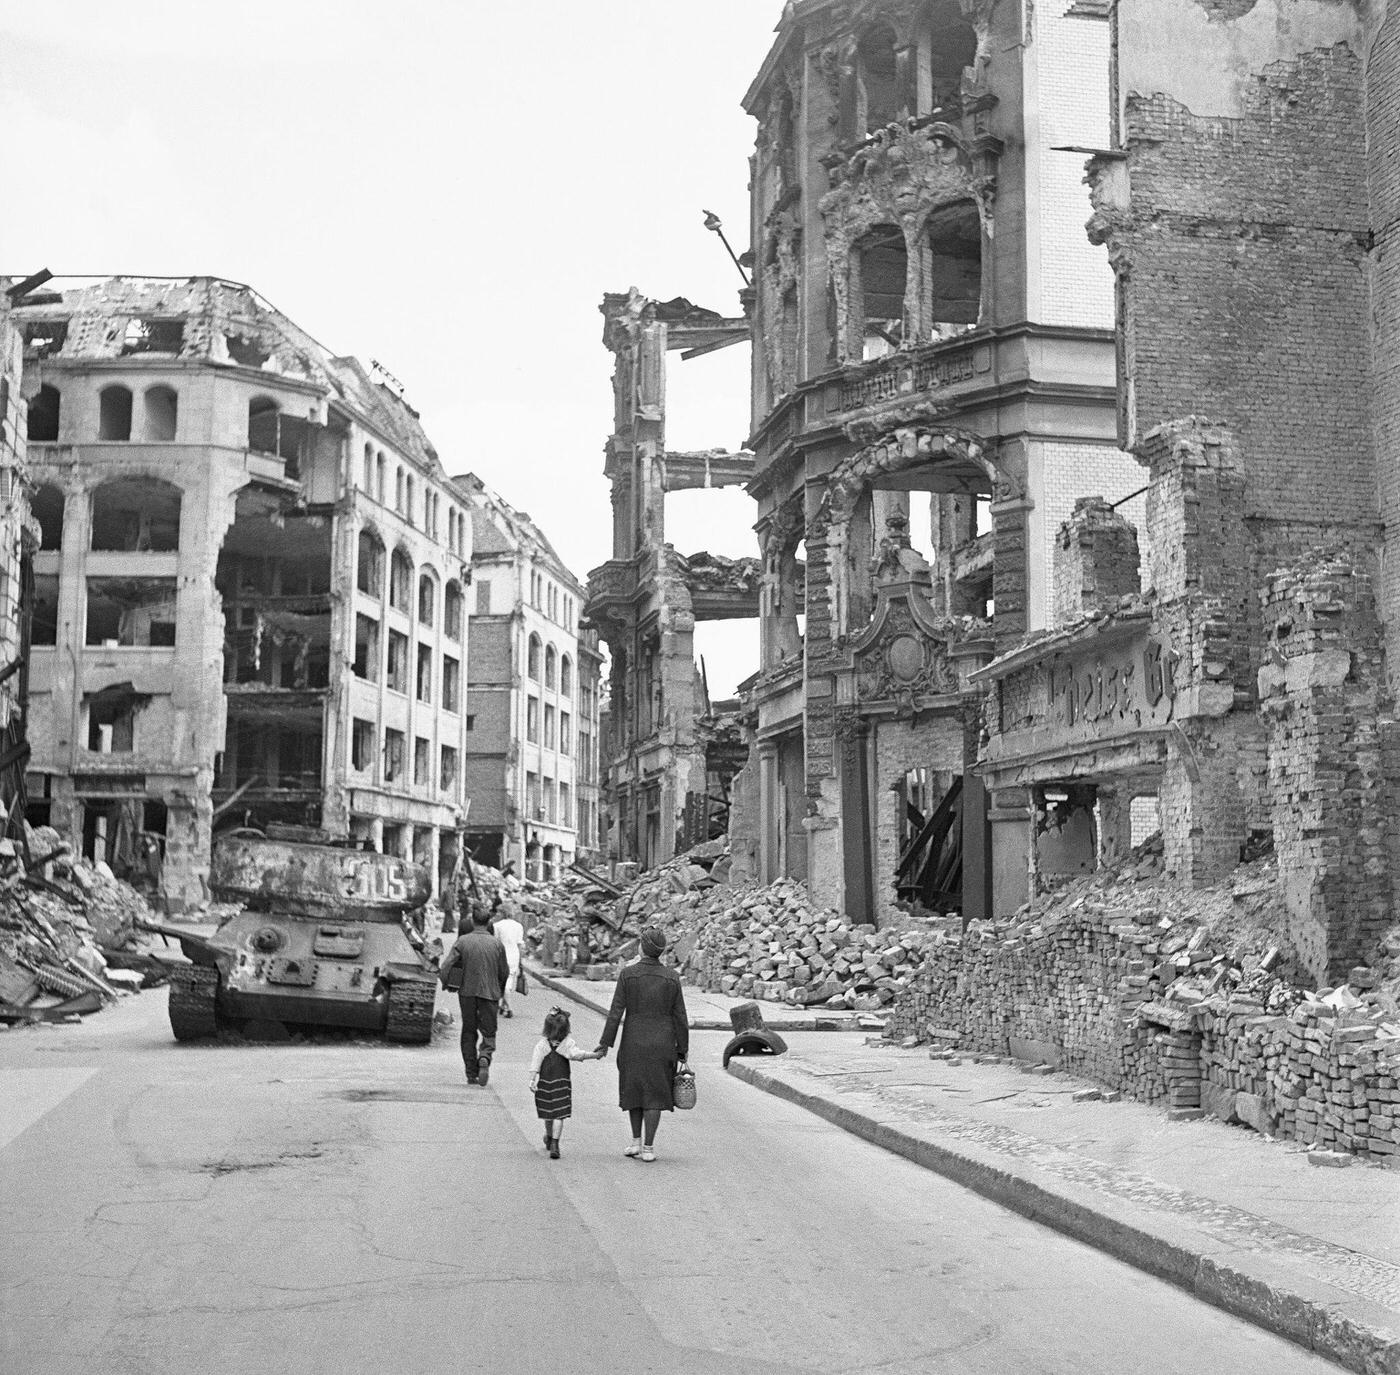 People walking through the city of ruins in Berlin, Germany, circa 1945.